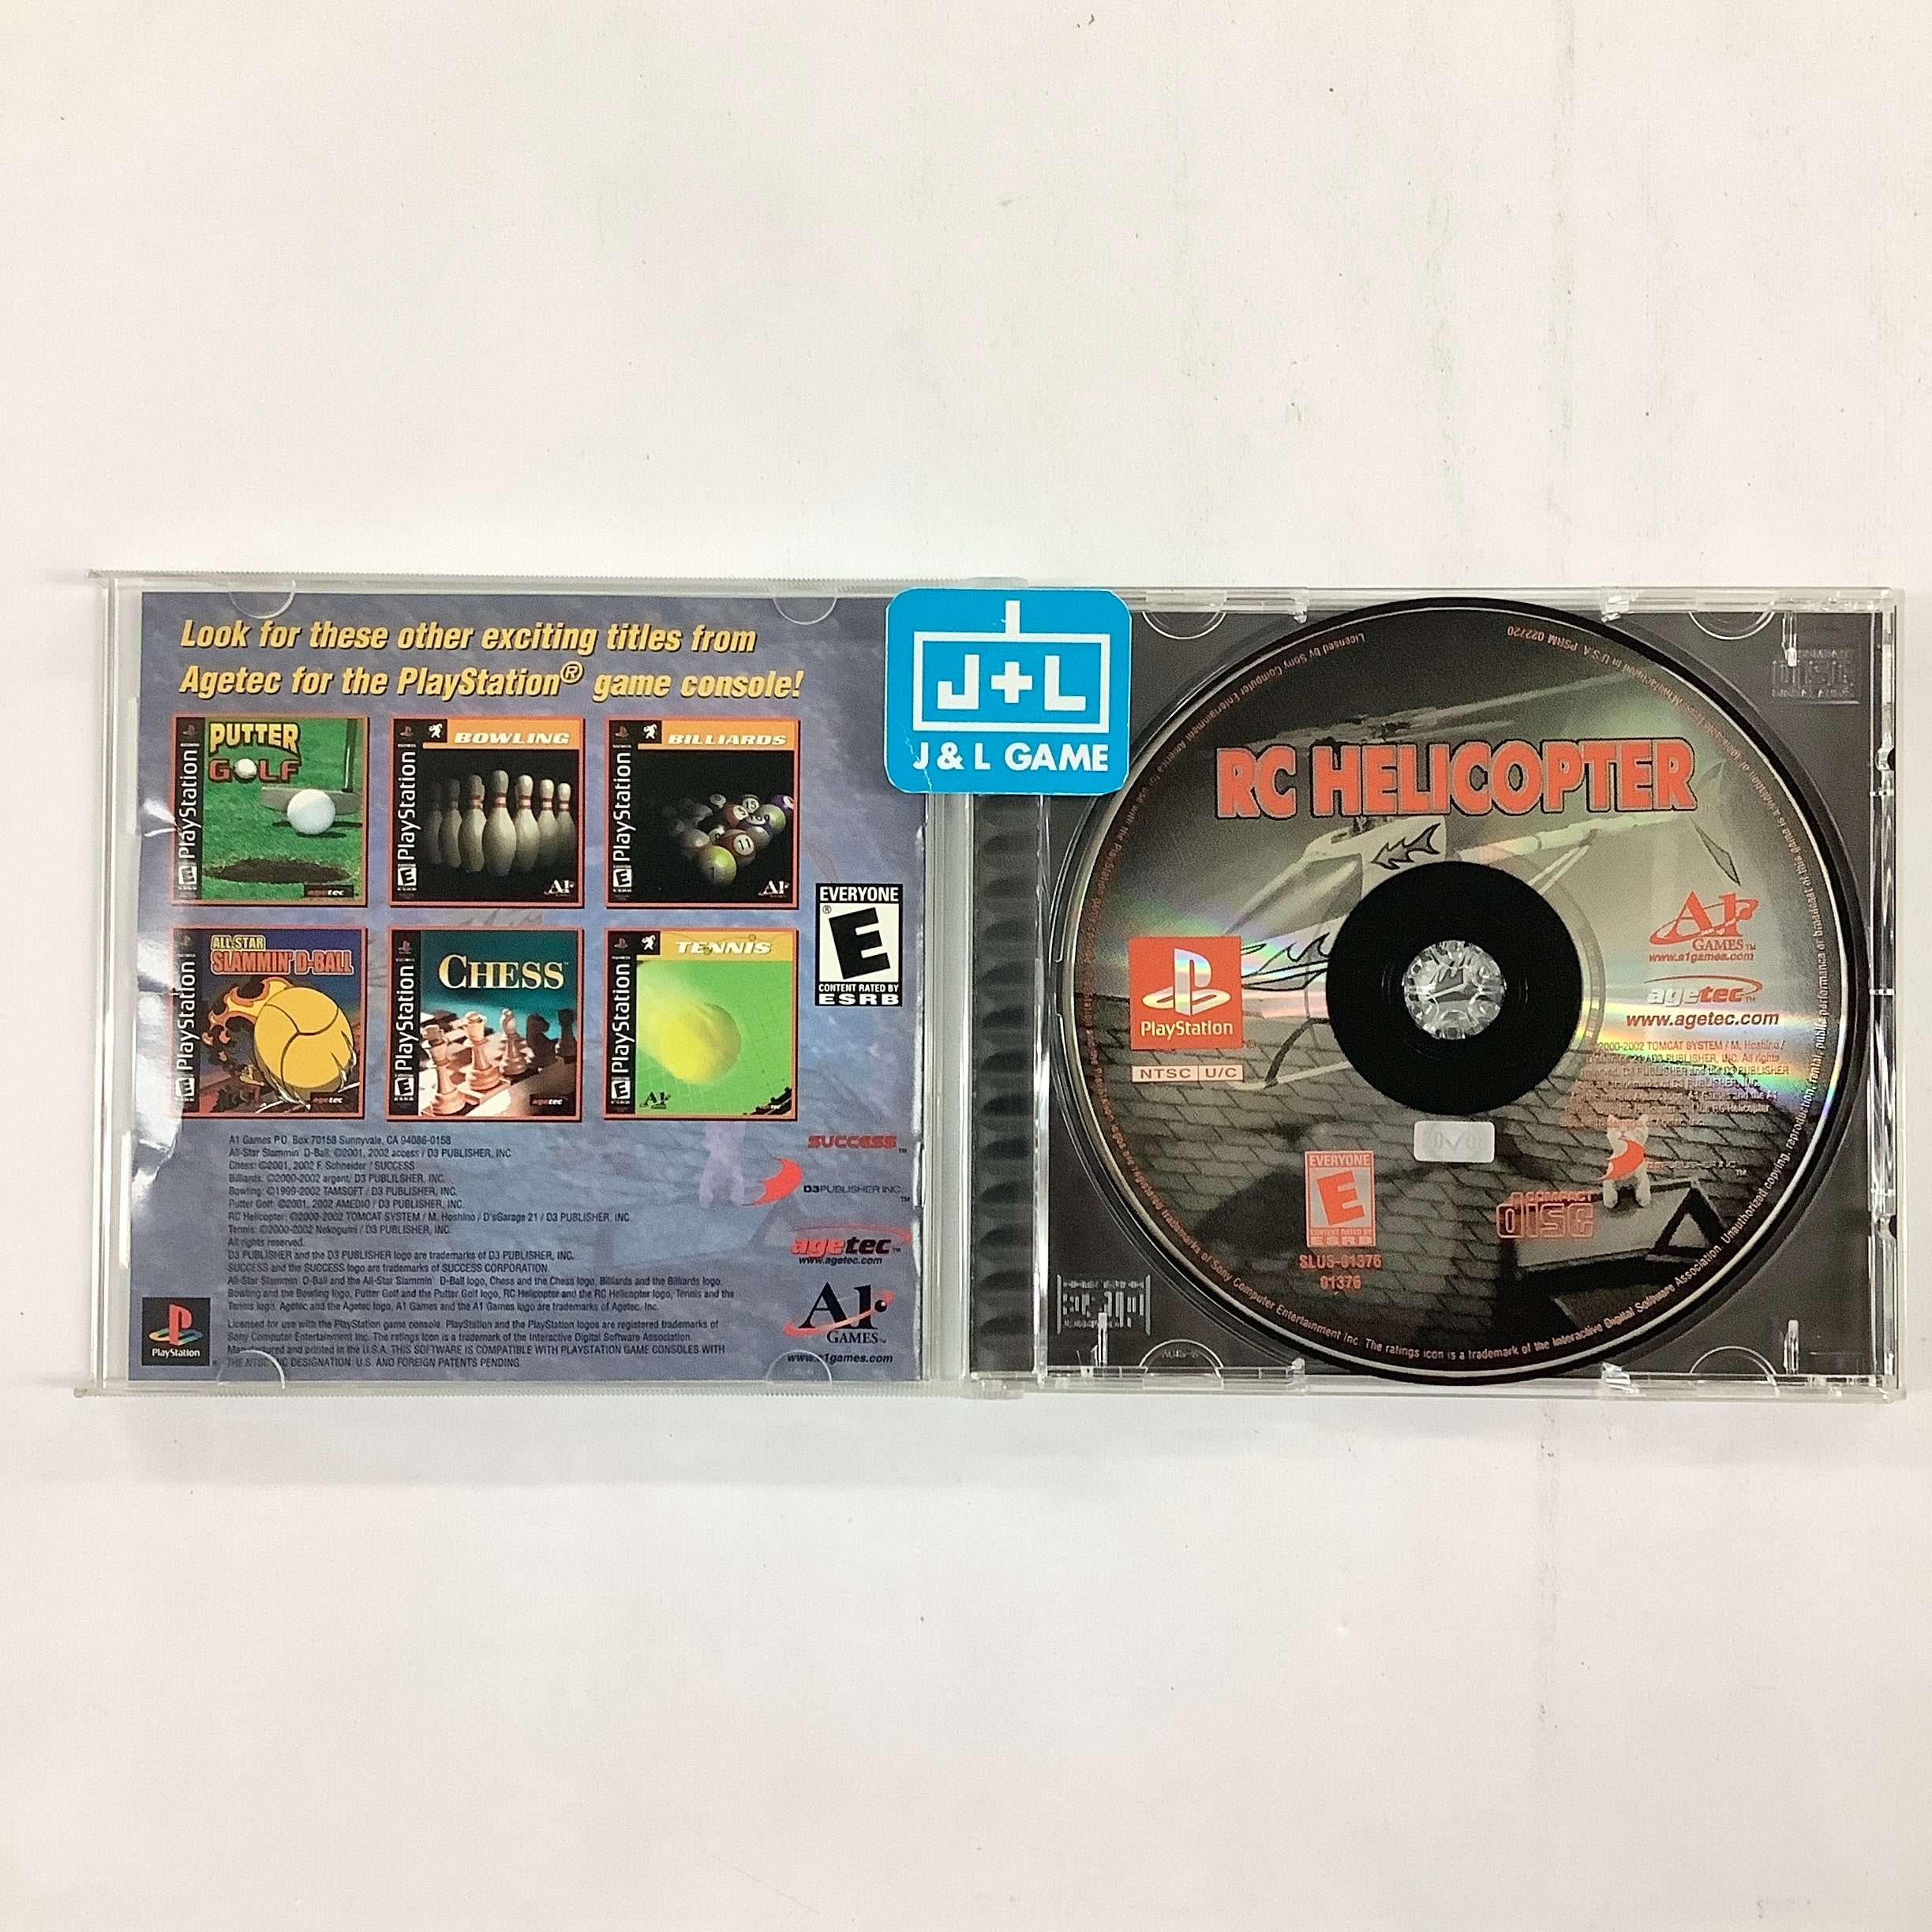 RC Helicopter - (PS1) PlayStation 1 [Pre-Owned] Video Games Agetec   